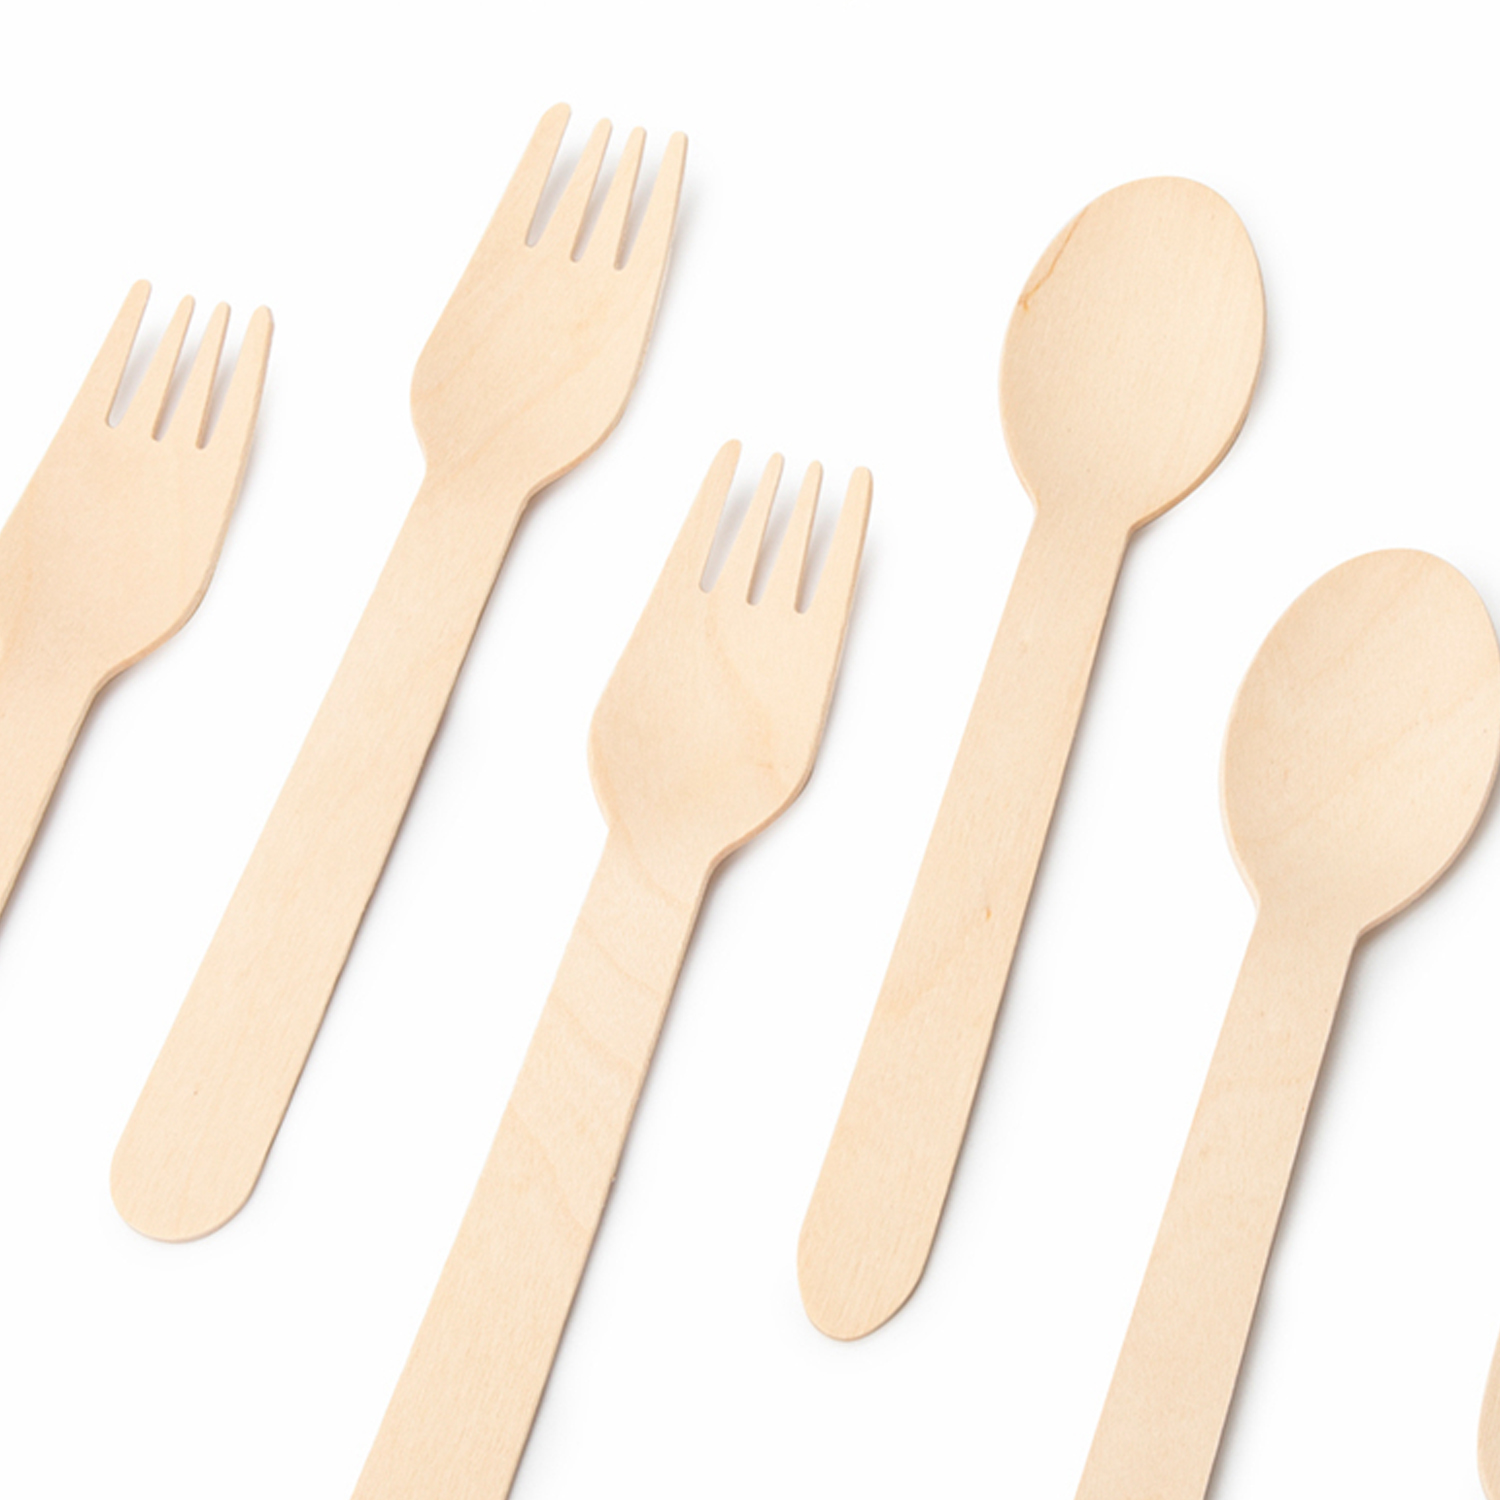 Wooden fork spoon disposable fork spoon